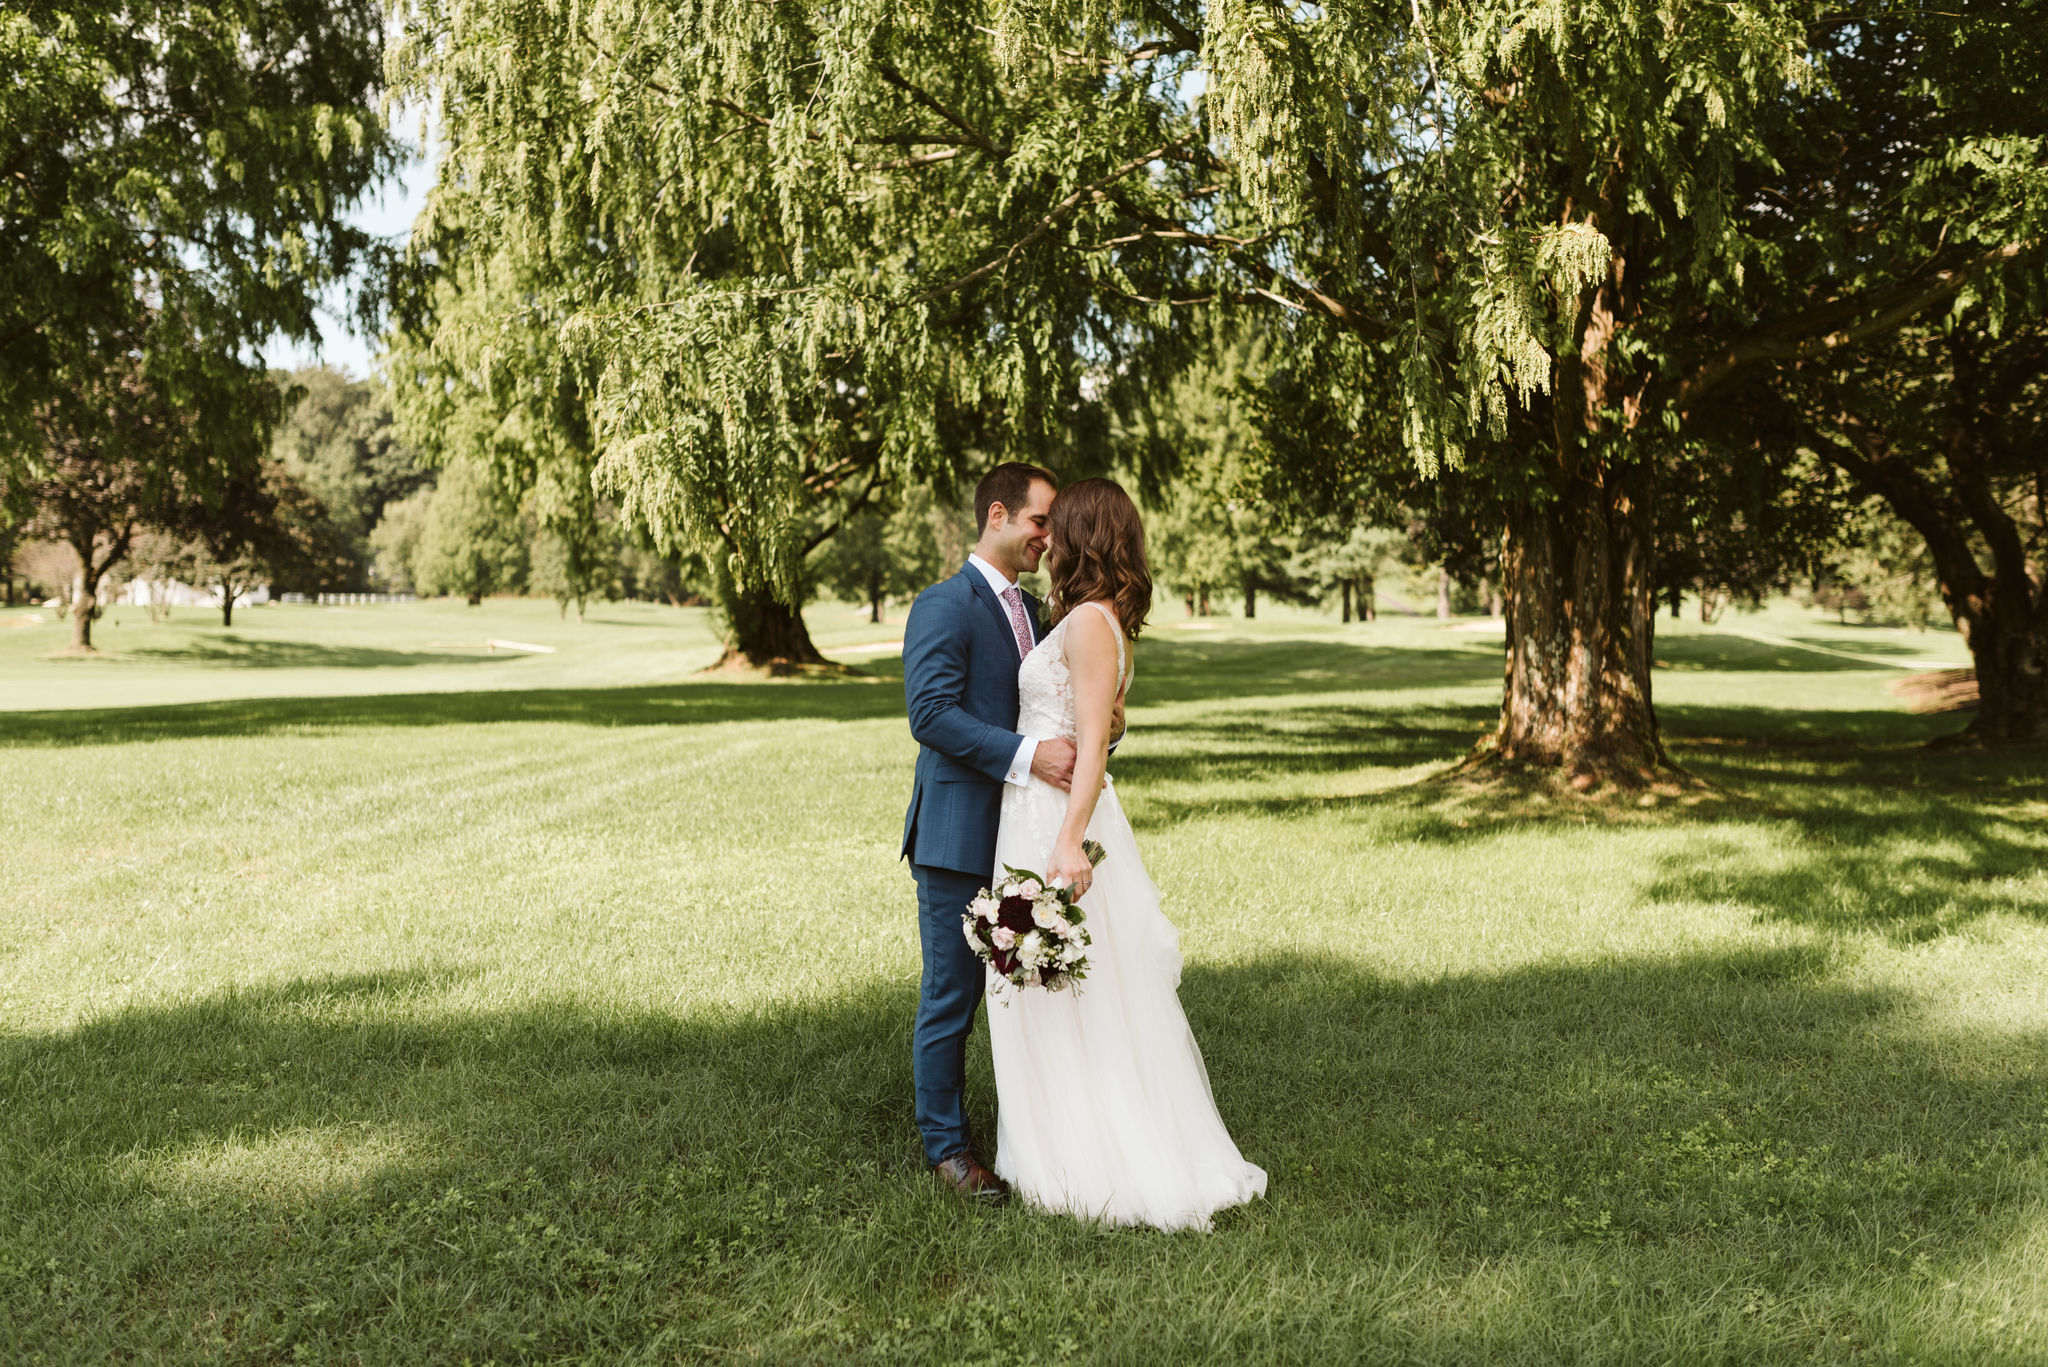  Phoenix Maryland, Baltimore Wedding Photographer, Eagle’s Nest Country Club, Classic, Romantic, Spring, Bride and Groom Kissing Under the Trees, Dundalk Florist, BHLDN Dress, Blue Generation Tux Suit 